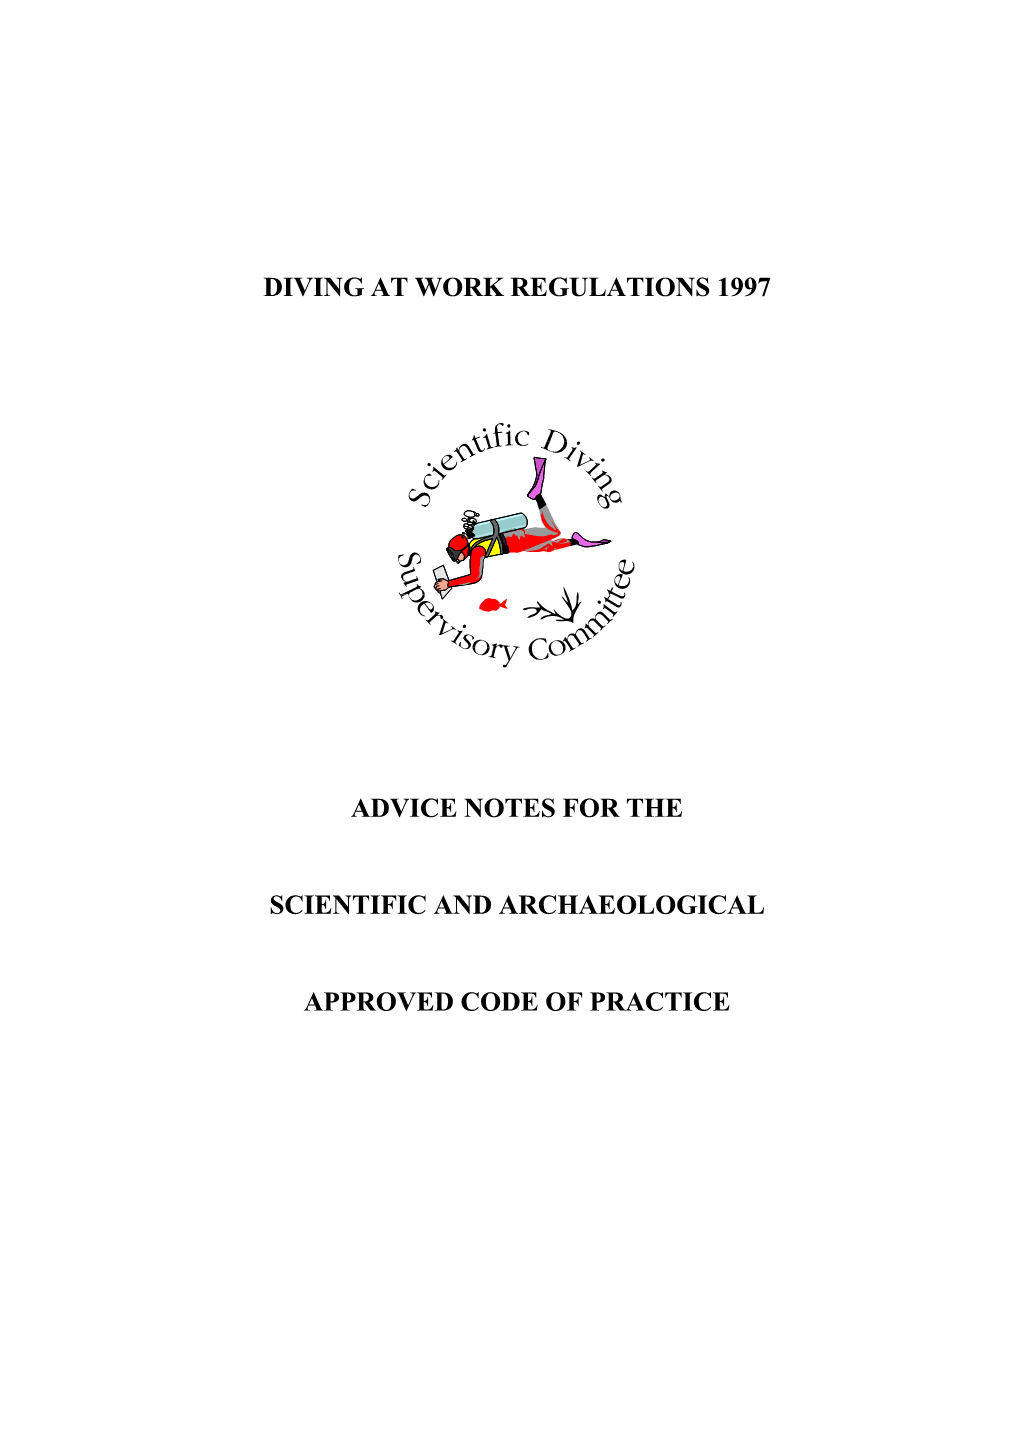 Advice Notes for the Scientific and Archaeological Approved Code of Practice